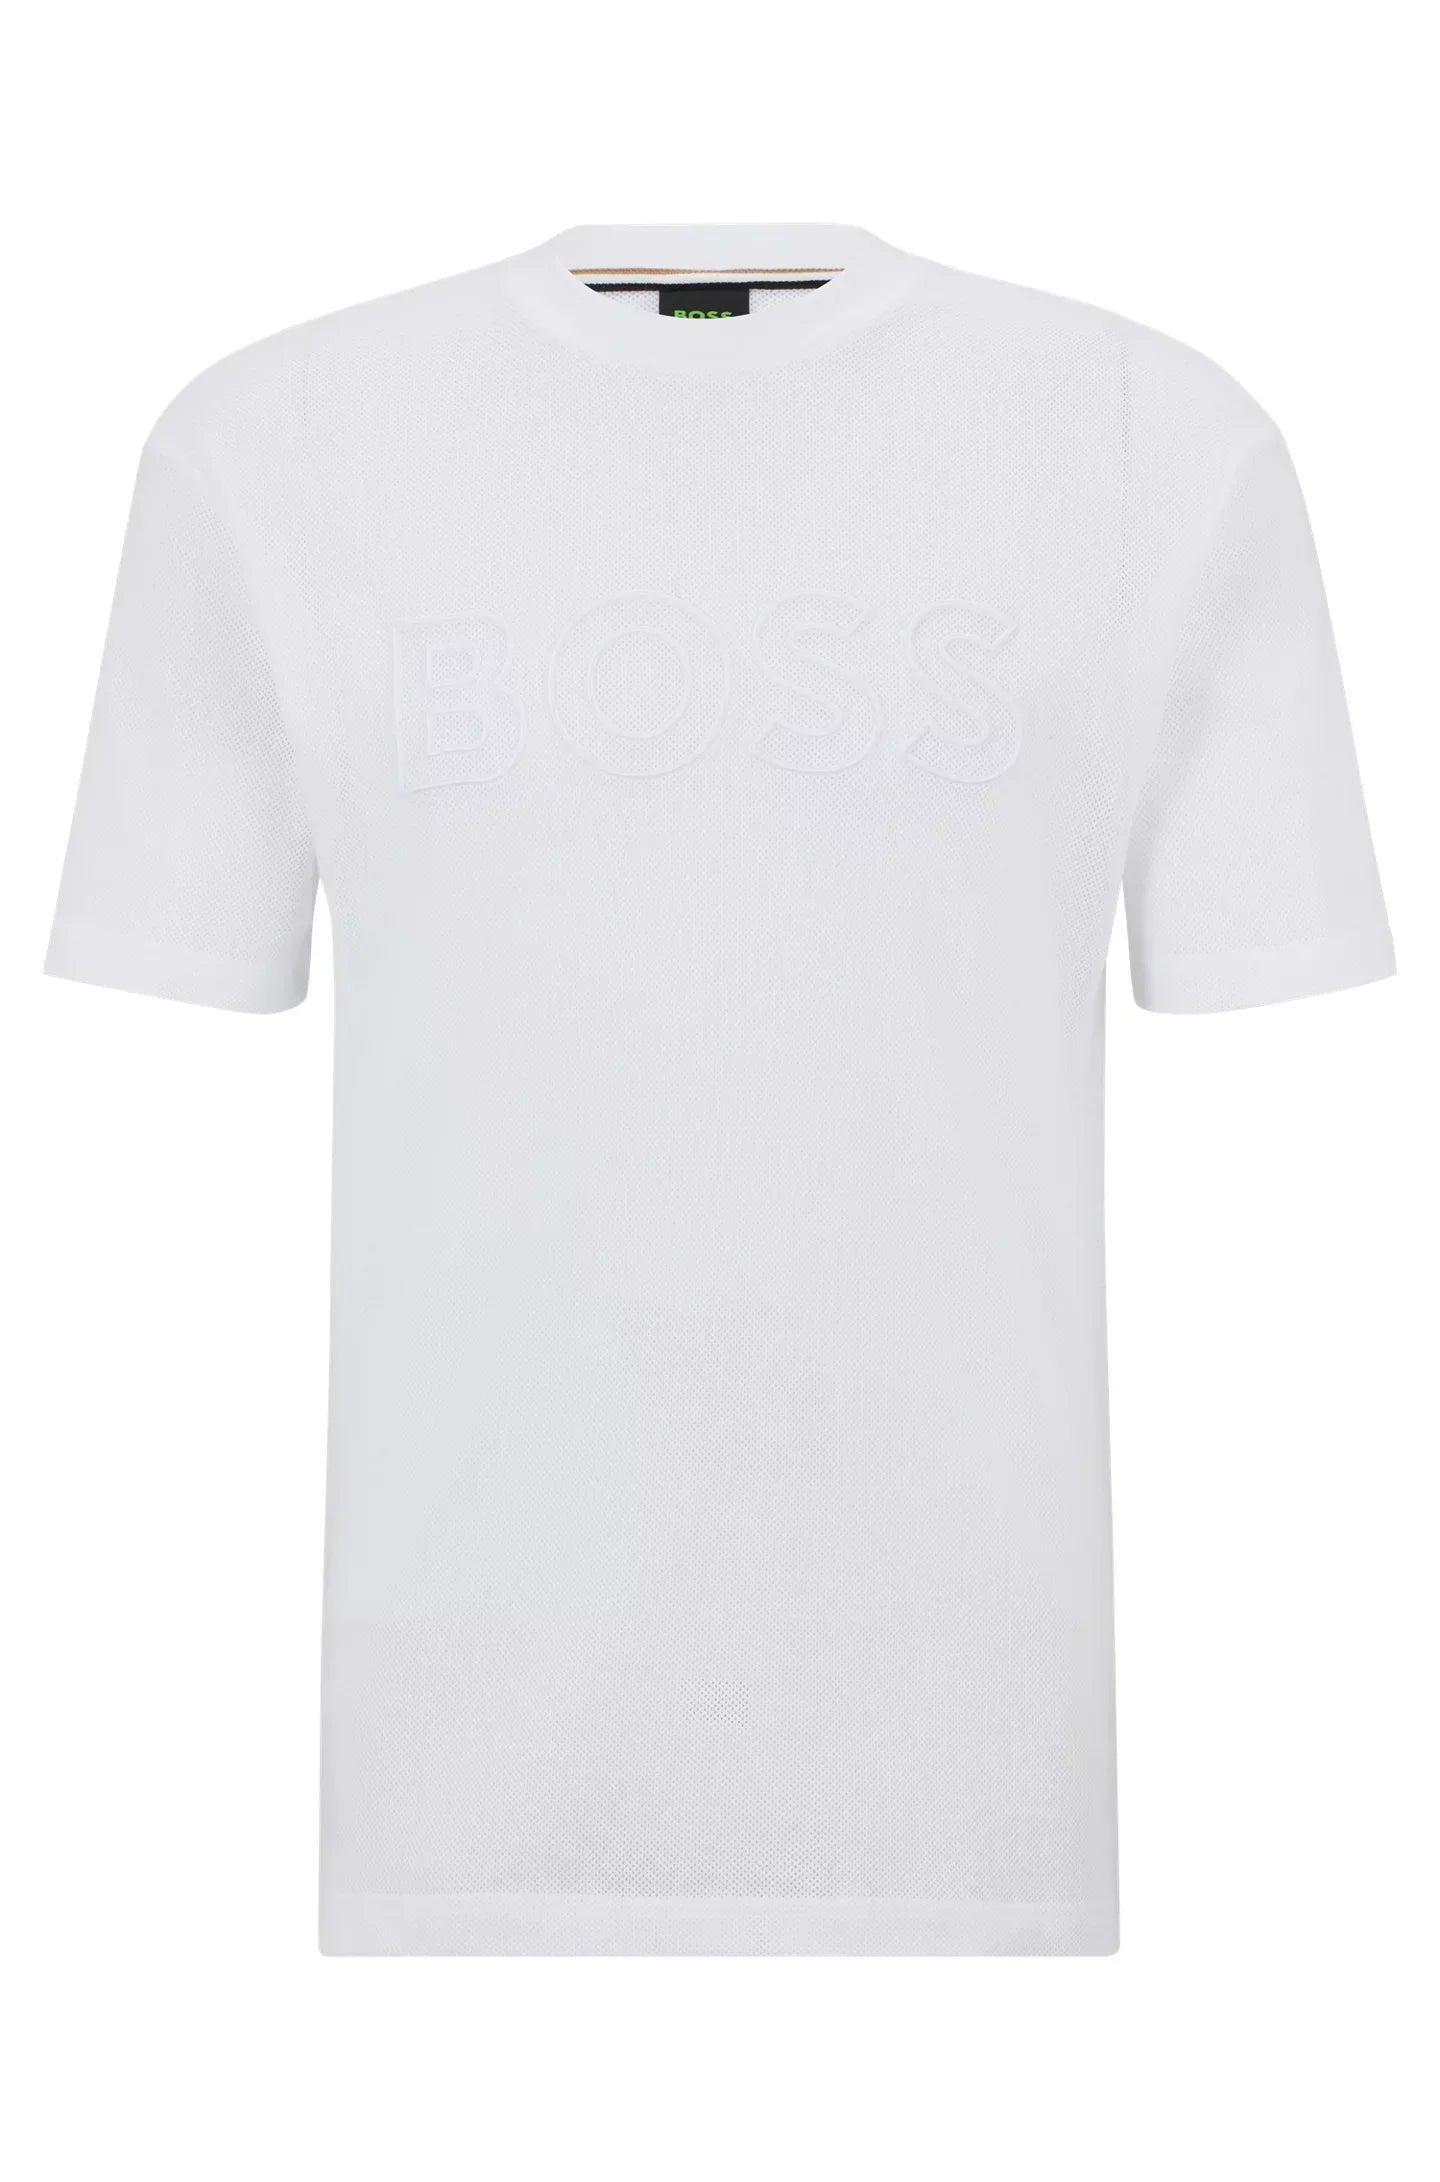 Suéter Boss Warp-Knit Embossed Logo Relaxed Fit - tiendadicons.com